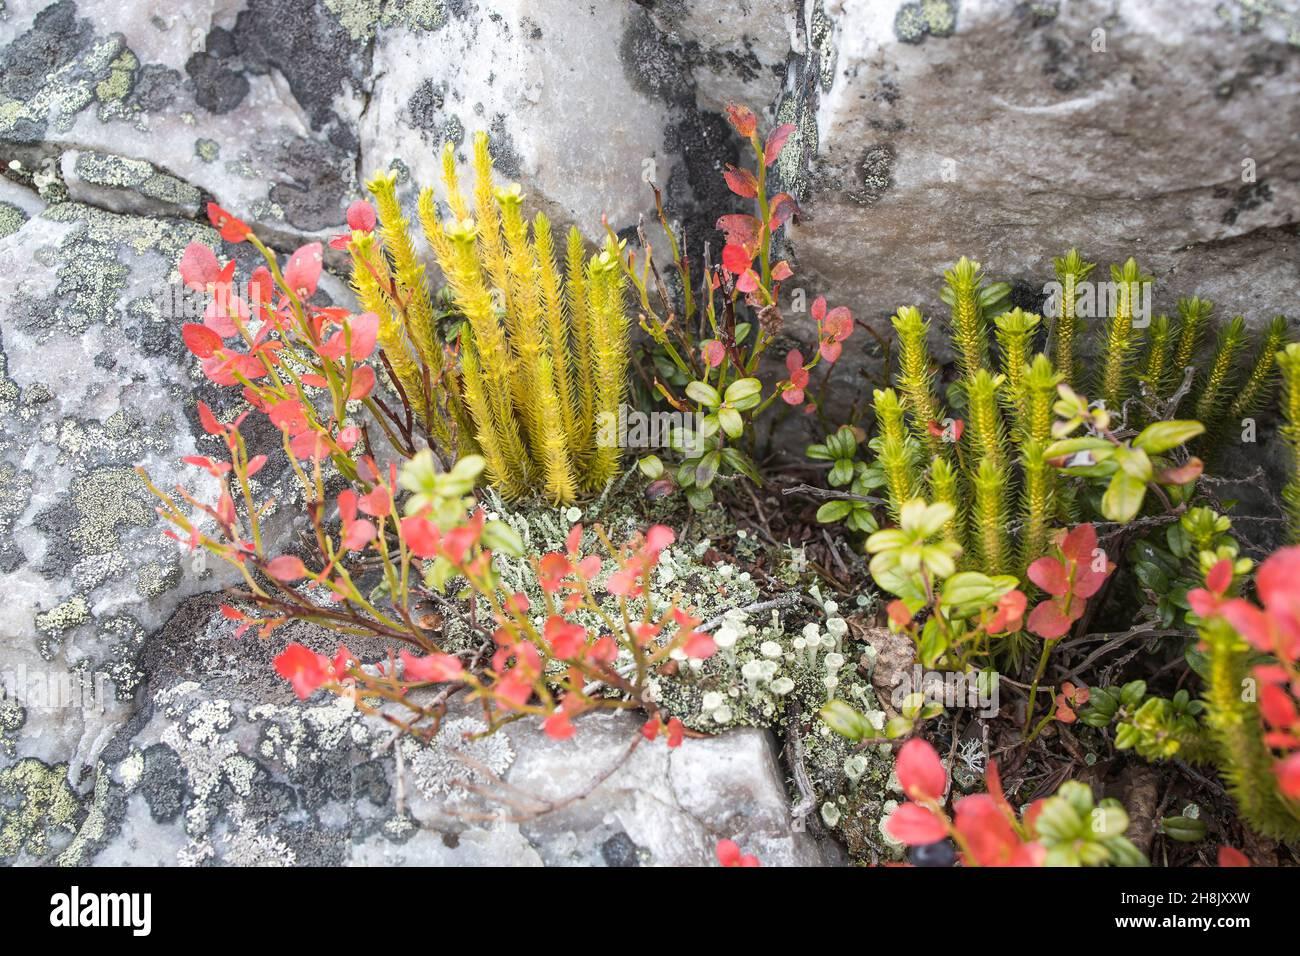 different-types-of-mosses-and-lichens-on-large-boulders-in-karelia-lasallia-pustulata-is-a-species-of-lichen-in-the-umbilicariaceae-family-of-fungi-2H8JXXW.jpg